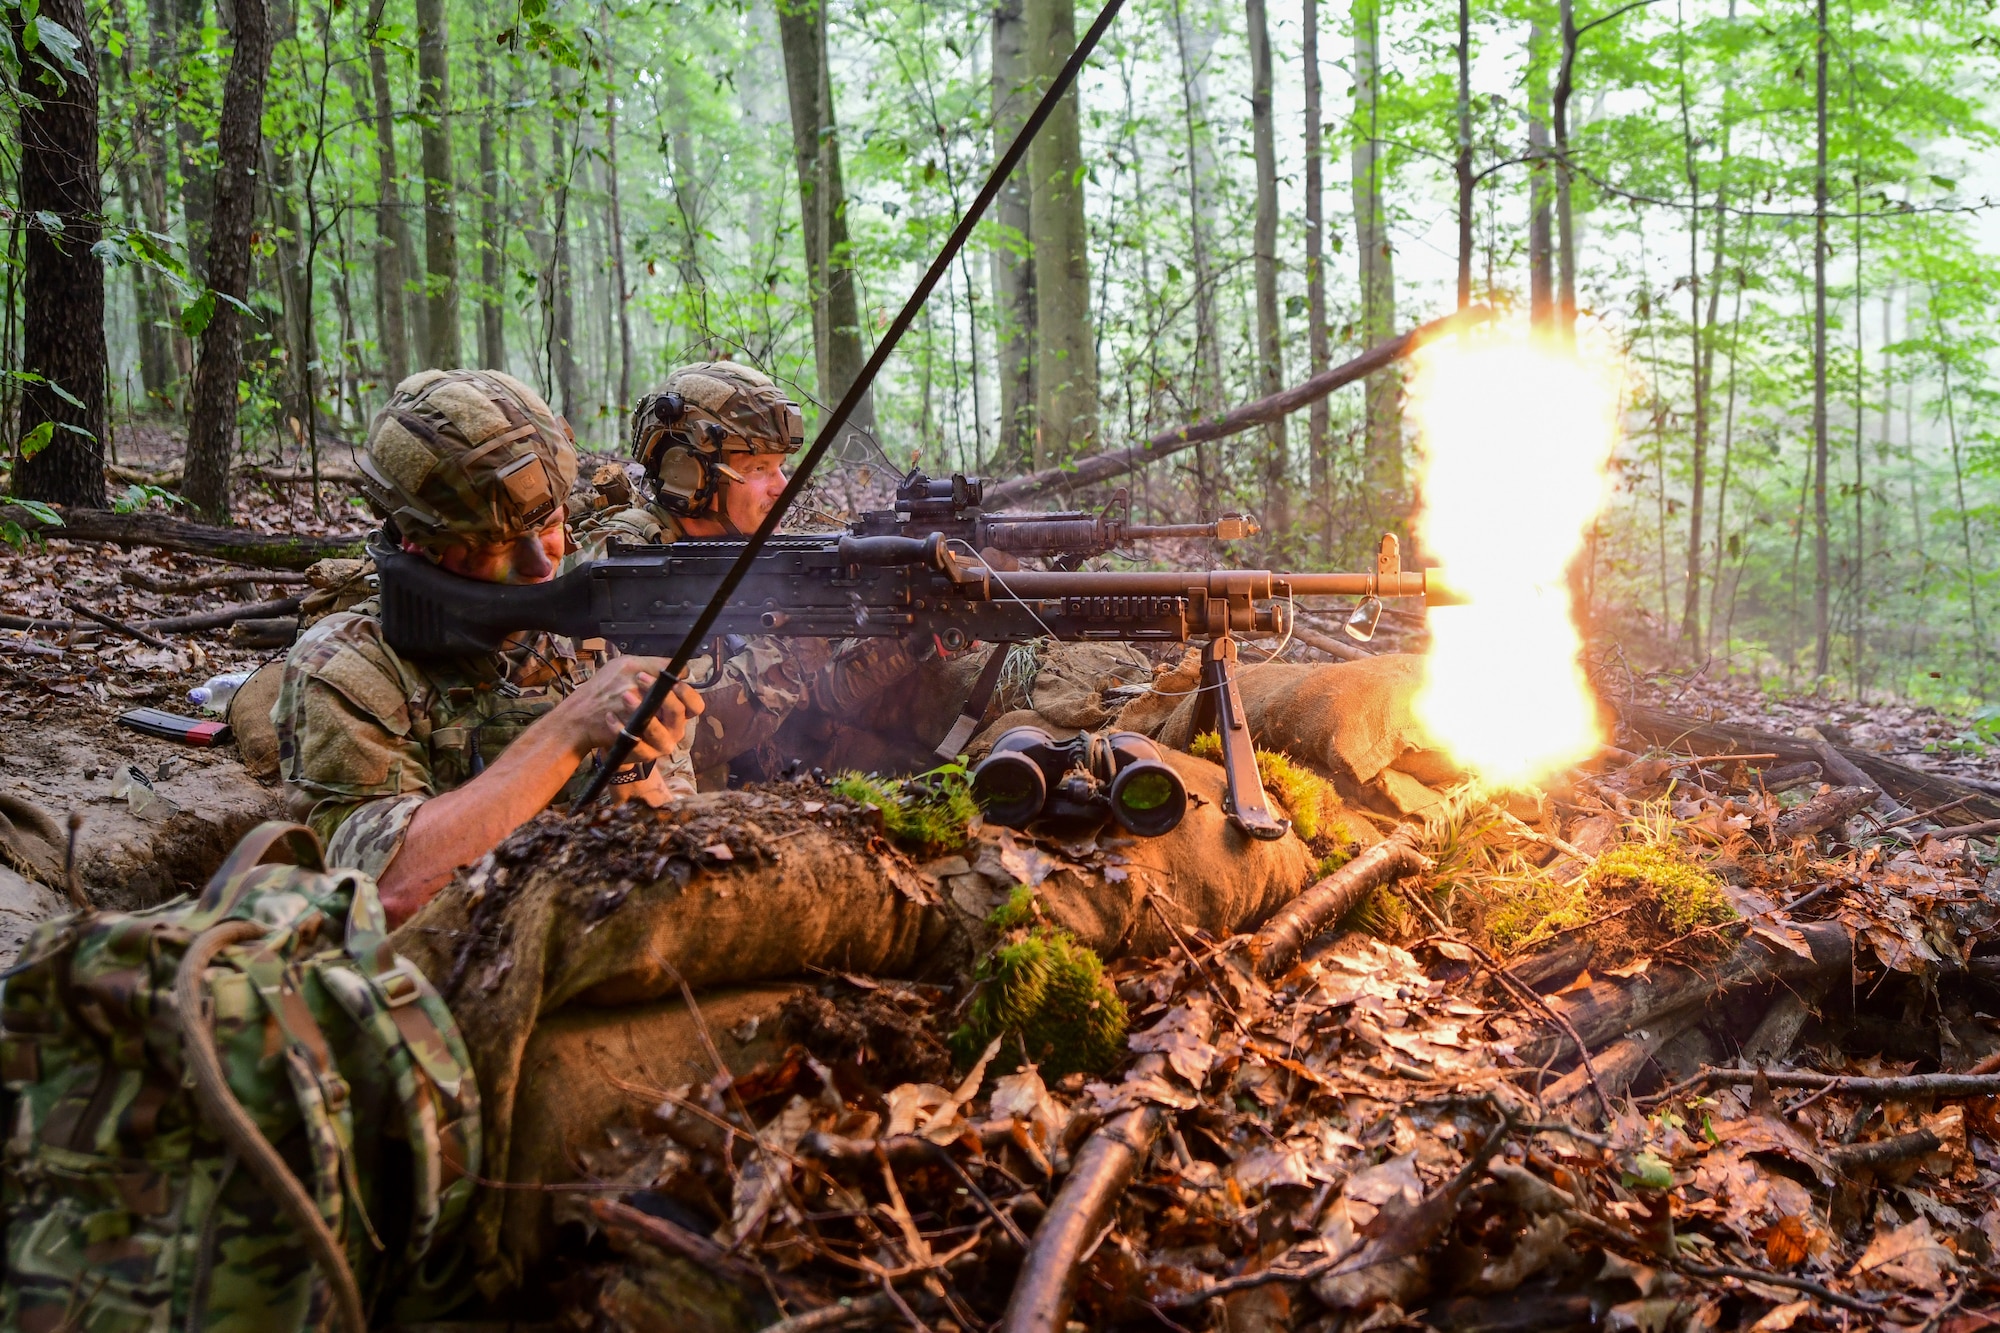 Airman 1st Class Drew Davis, Integrated Defense Leadership Course student assigned to the 307th Security Forces Squadron, Barksdale Air Force Base, Louisiana, fires blank rounds from his M240 machine gun toward opposing force members while Daniel Knight, an IDLC student assigned to the 302nd Security Forces Squadron, Peterson Space Force Base, Colorado, engages with his M4 during a static defense exercise at Camp James A. Garfield Joint Military Training Center, Ohio, July 27, 2022.